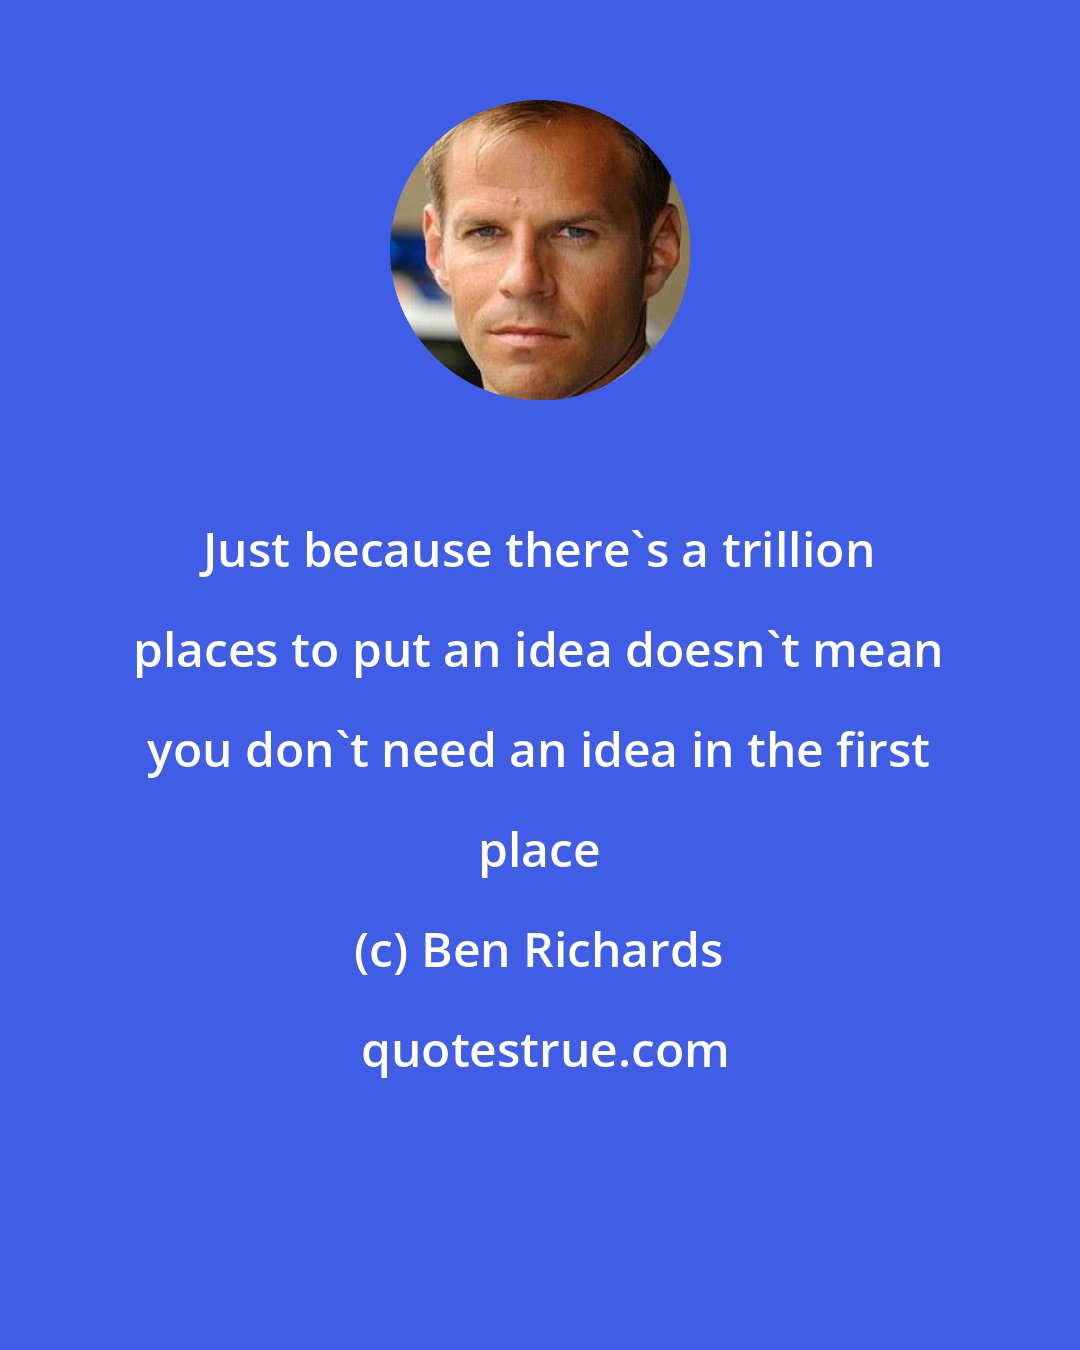 Ben Richards: Just because there's a trillion places to put an idea doesn't mean you don't need an idea in the first place